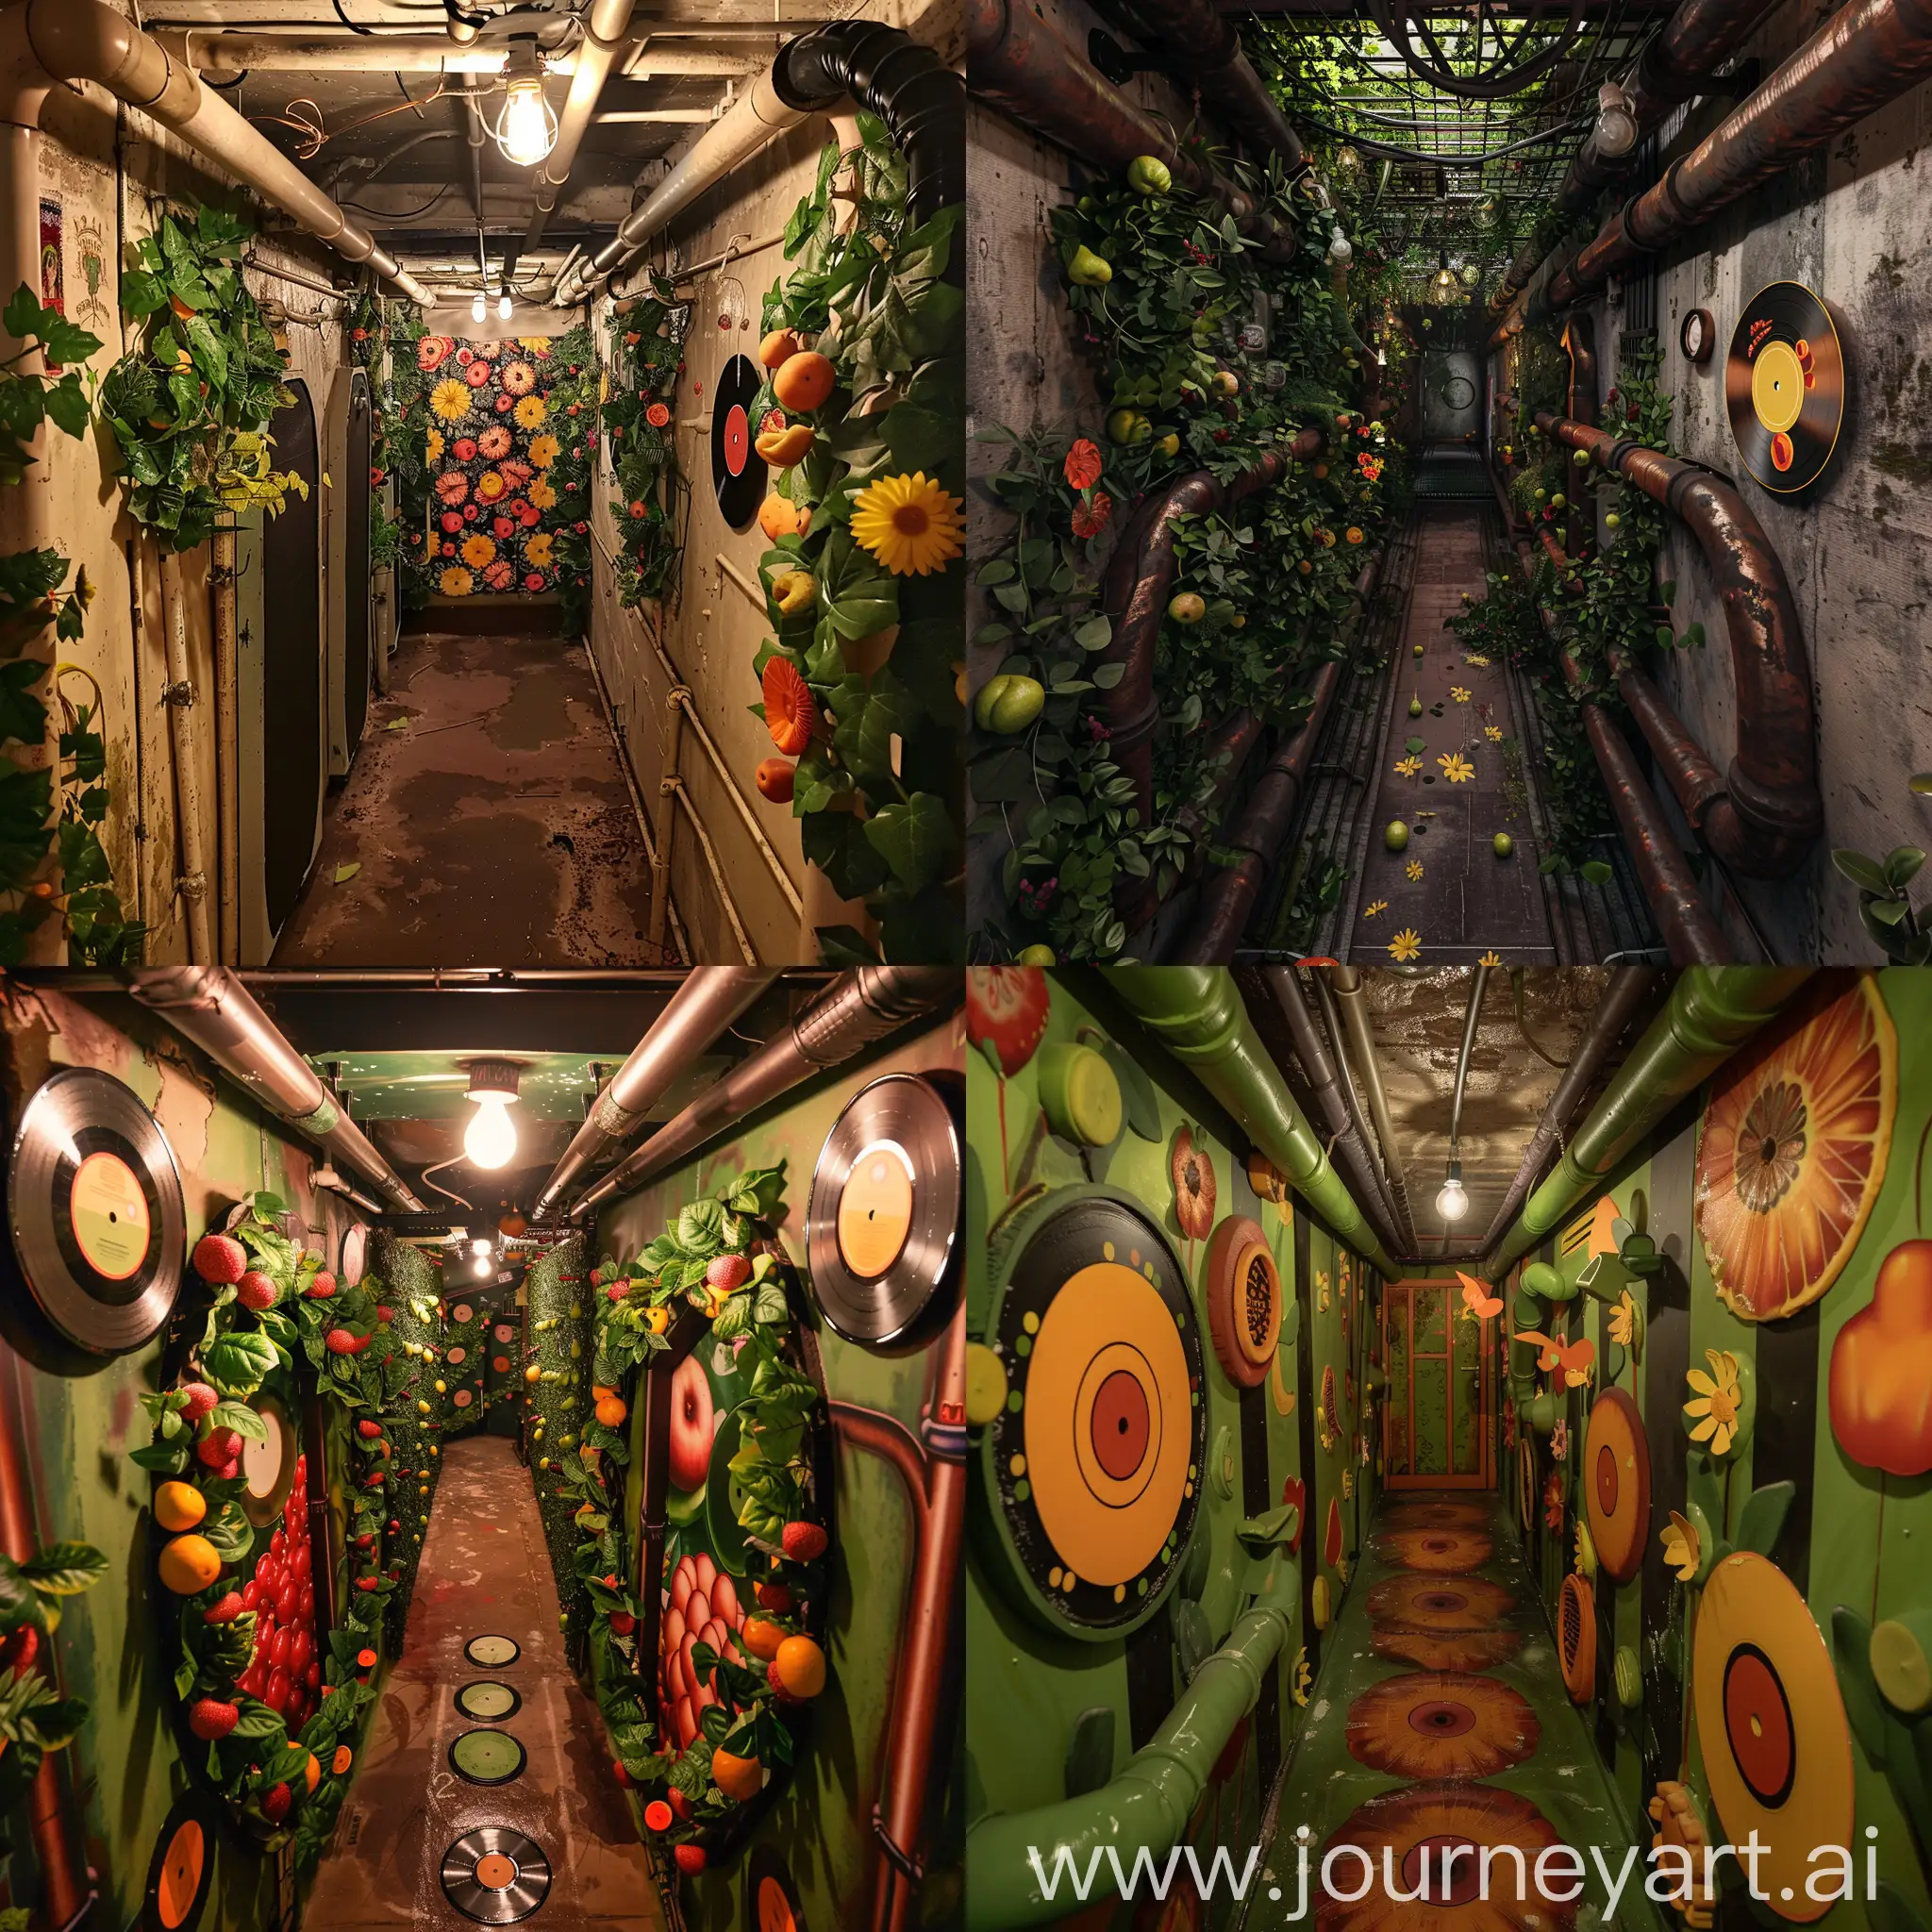 Sunny-Daytime-Party-Decor-in-Oblong-Basement-Corridor-with-Greenery-and-Records